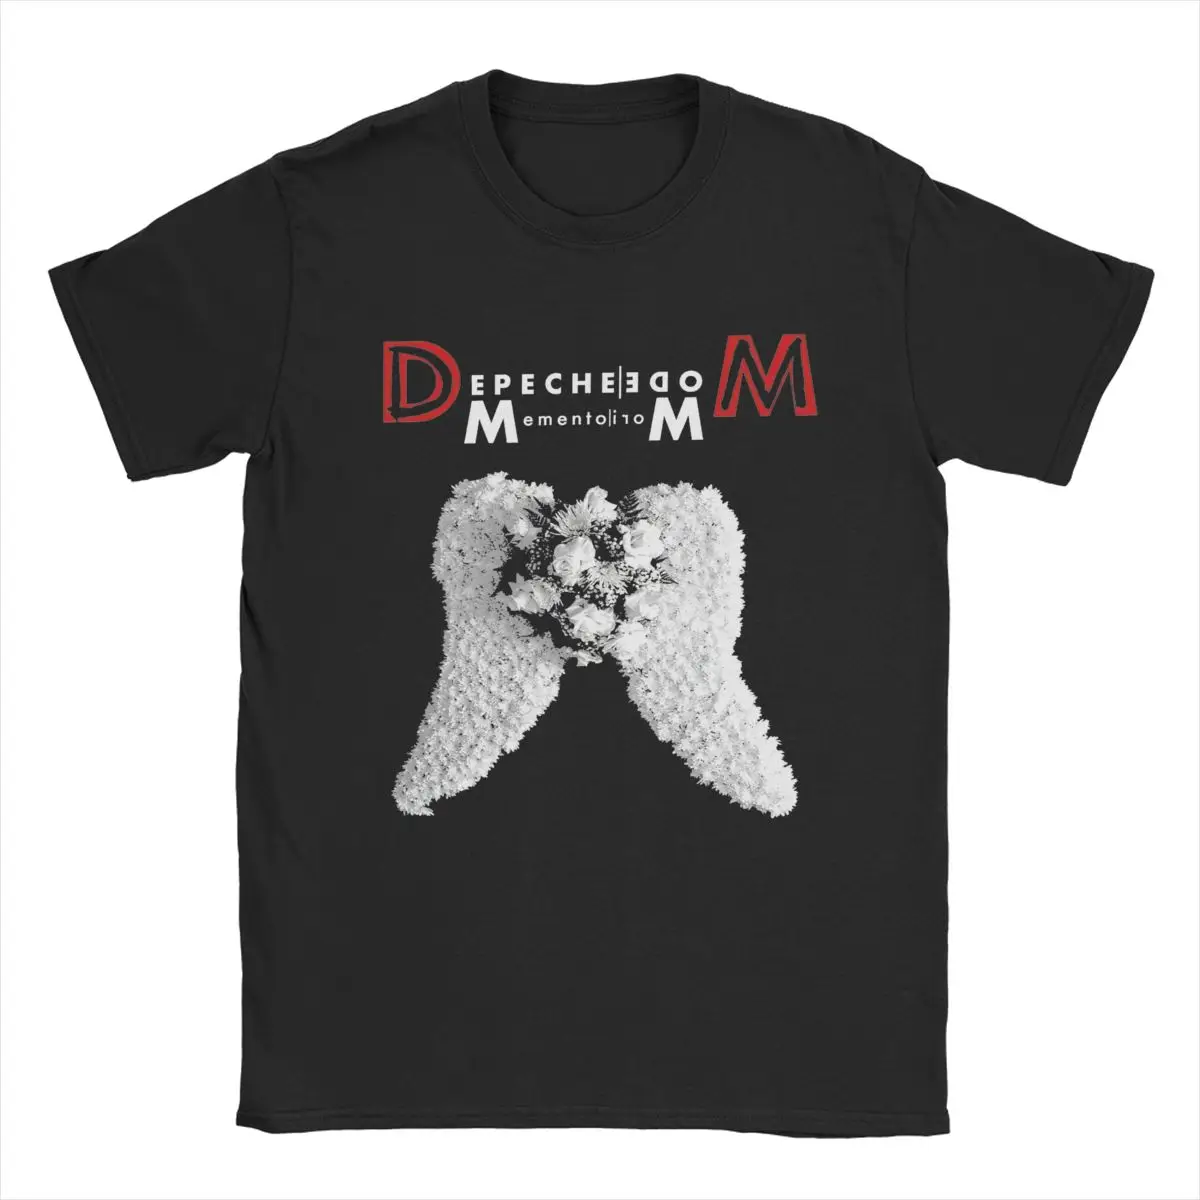 

Novelty White Wings Depeche Cool Mode T-Shirt Men Round Neck Pure Cotton T Shirts Short Sleeve Tees 4XL 5XL 6XL Clothing